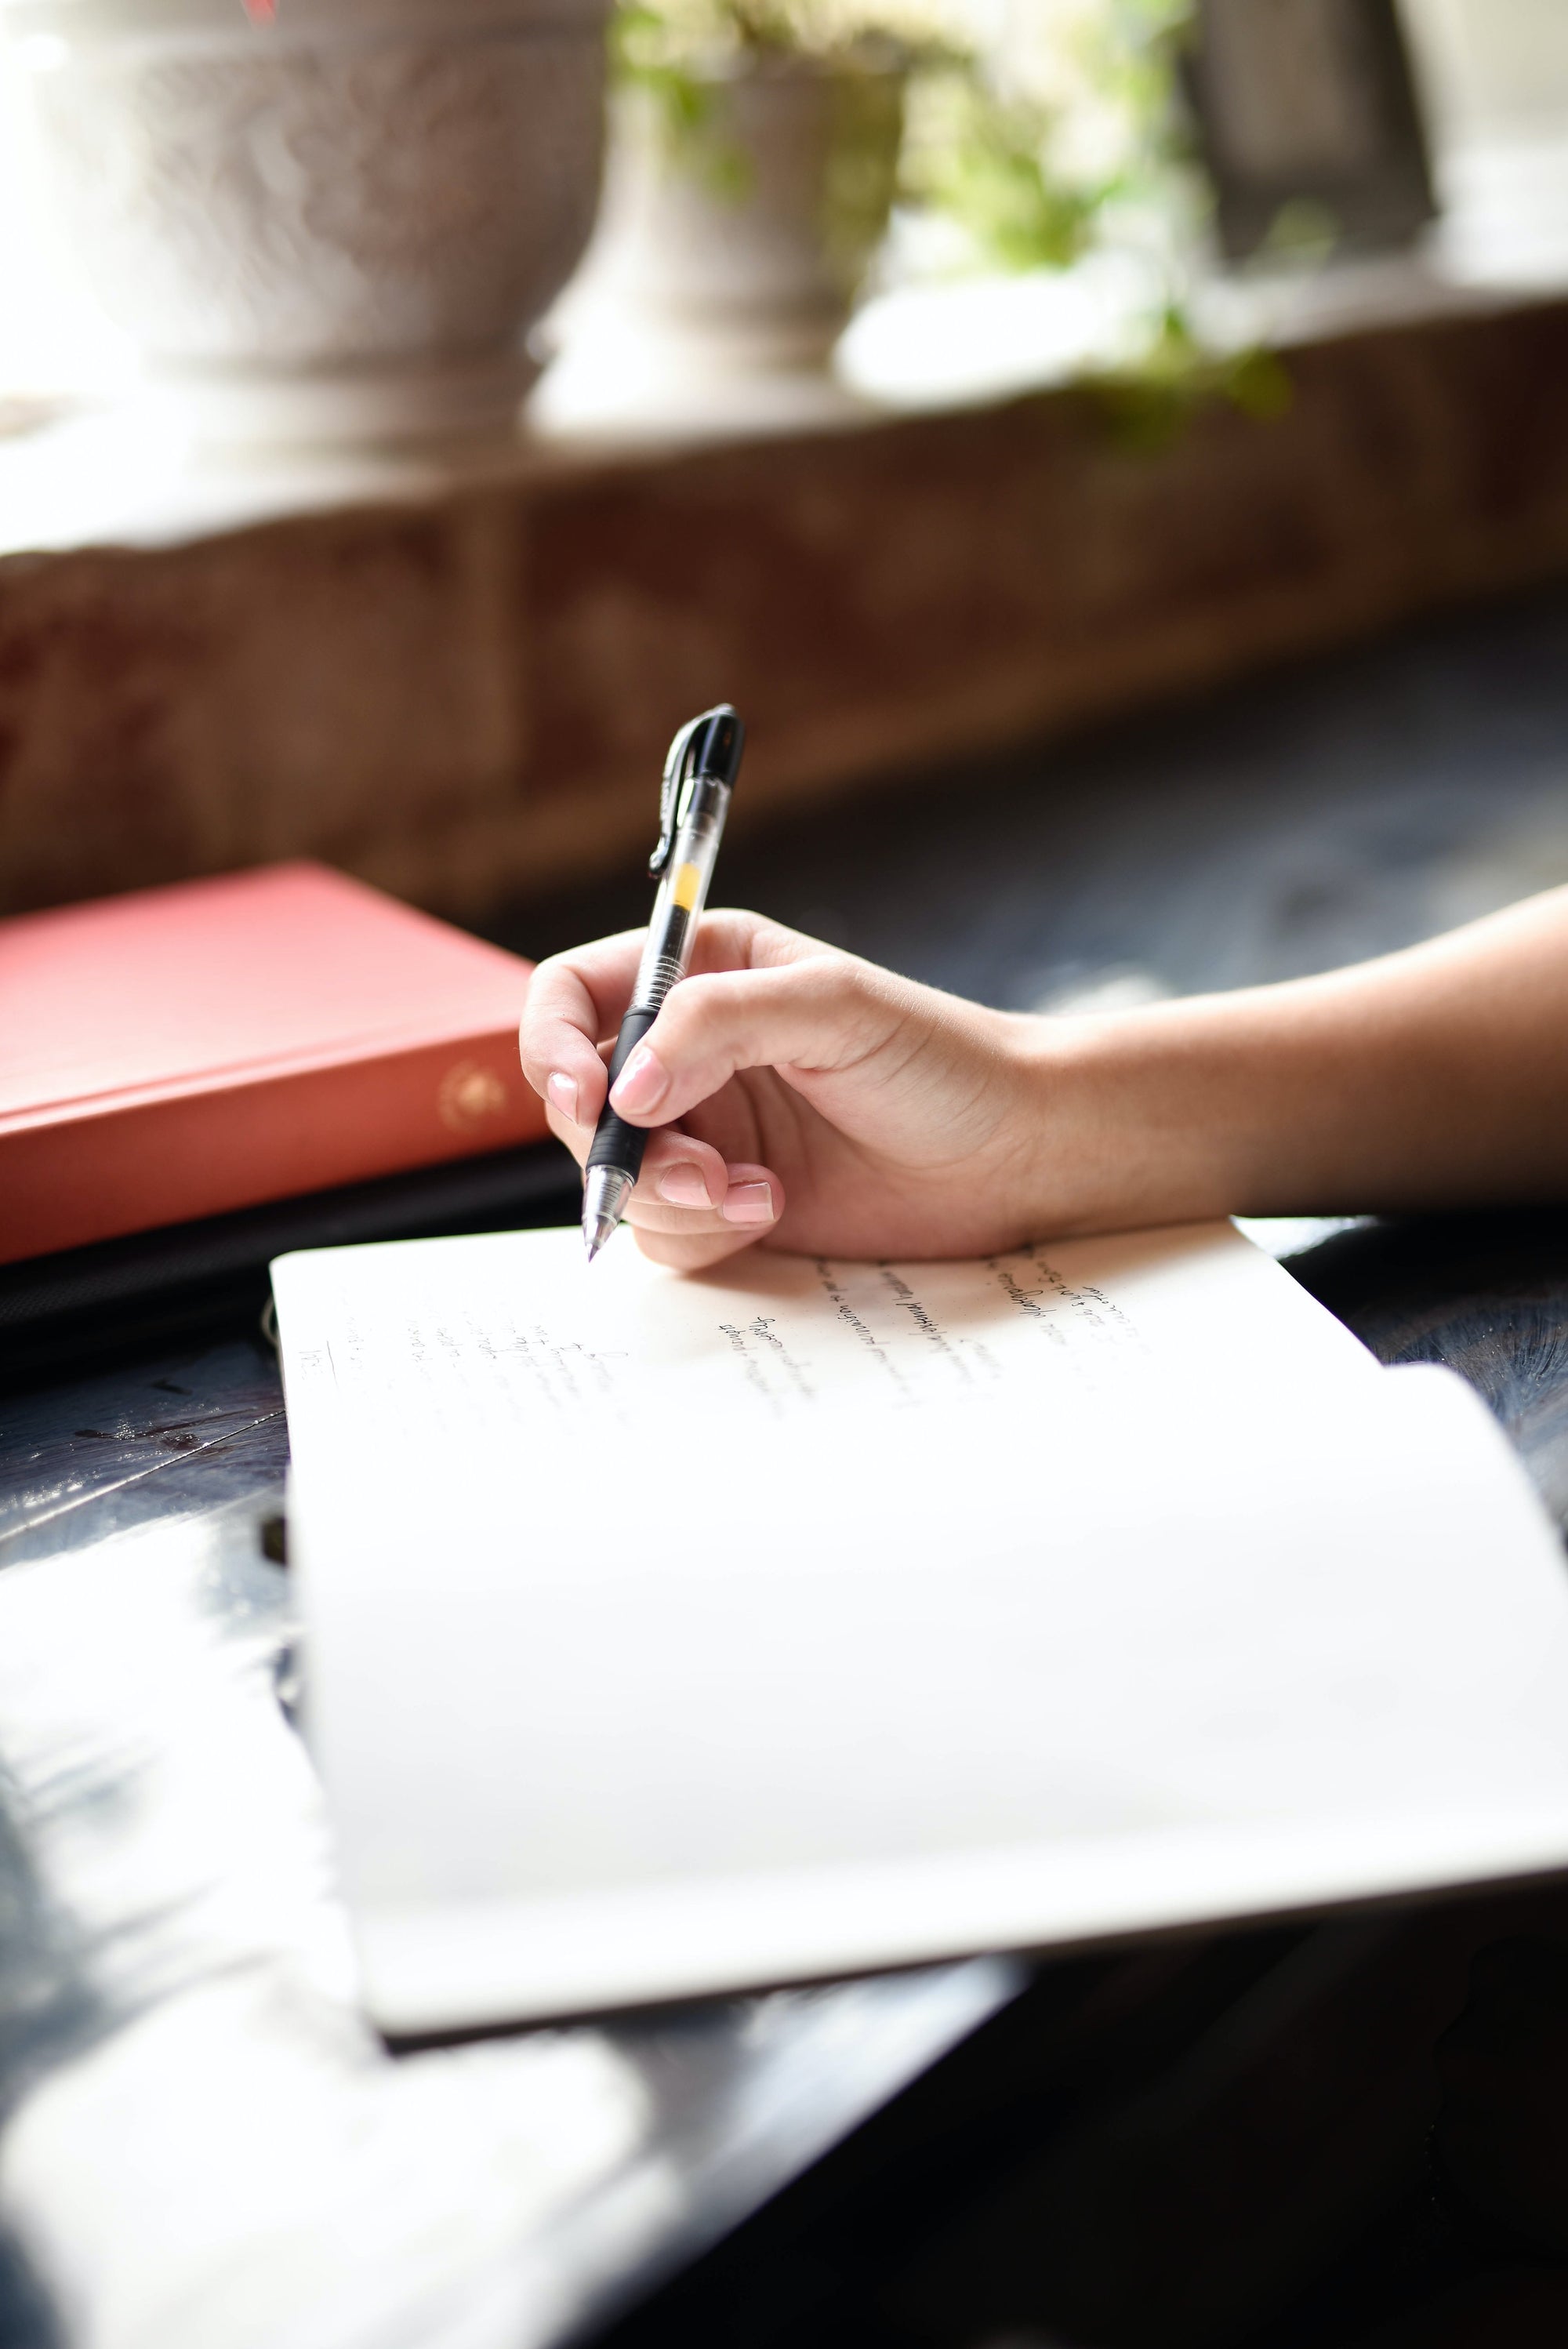 How to Effectively Journal for Self-Growth